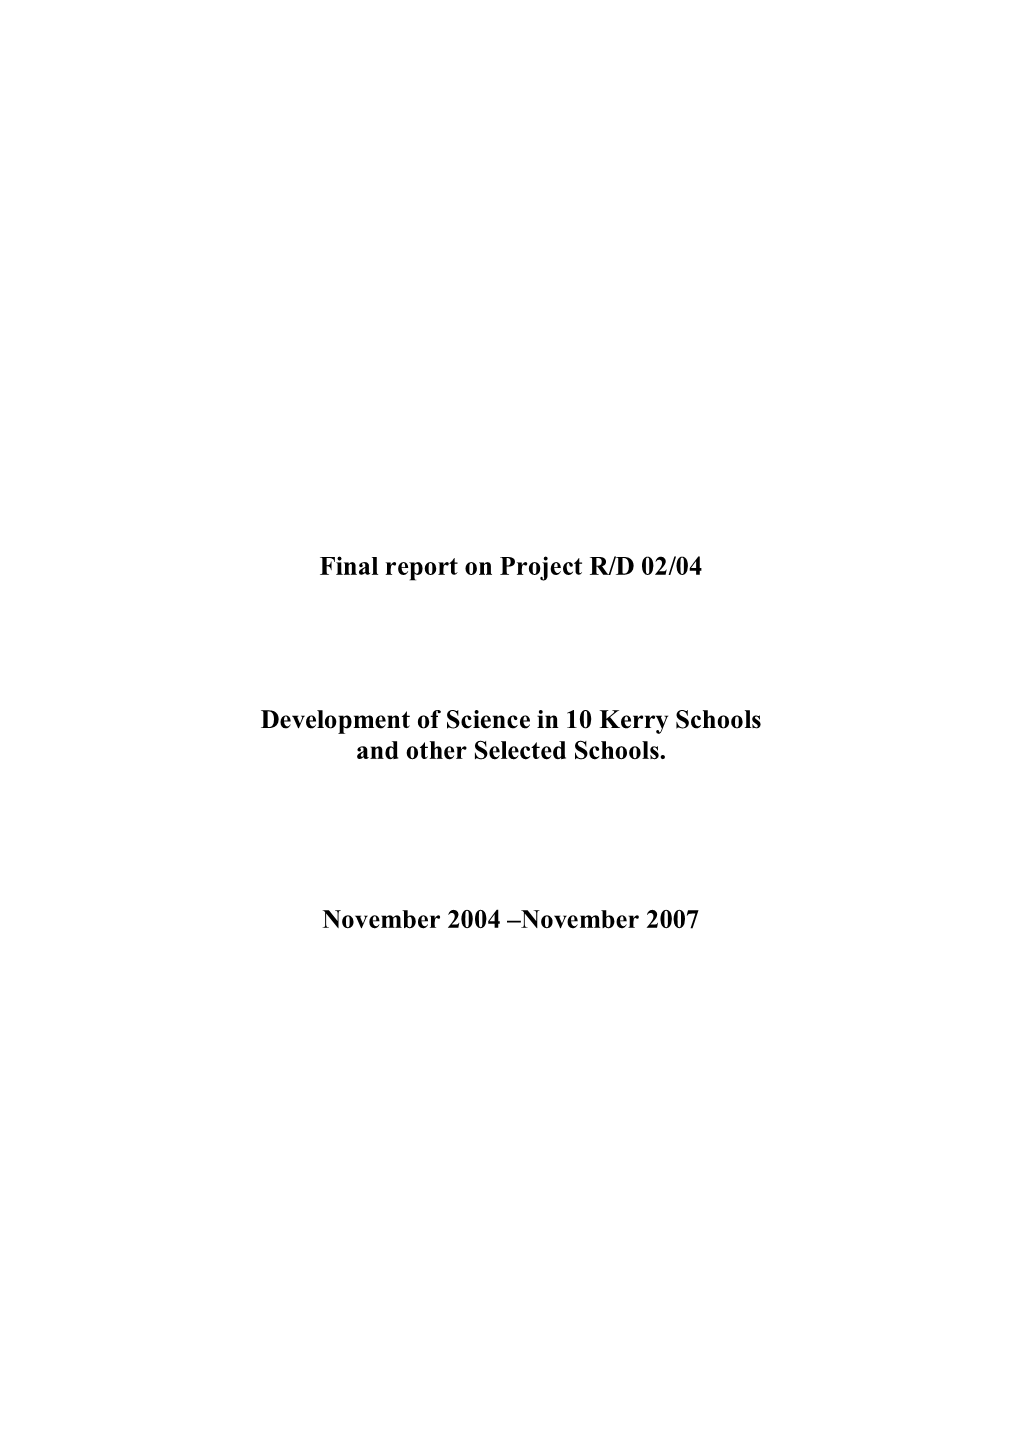 Final Report on Project R/D 02/04 Development of Science in 10 Kerry